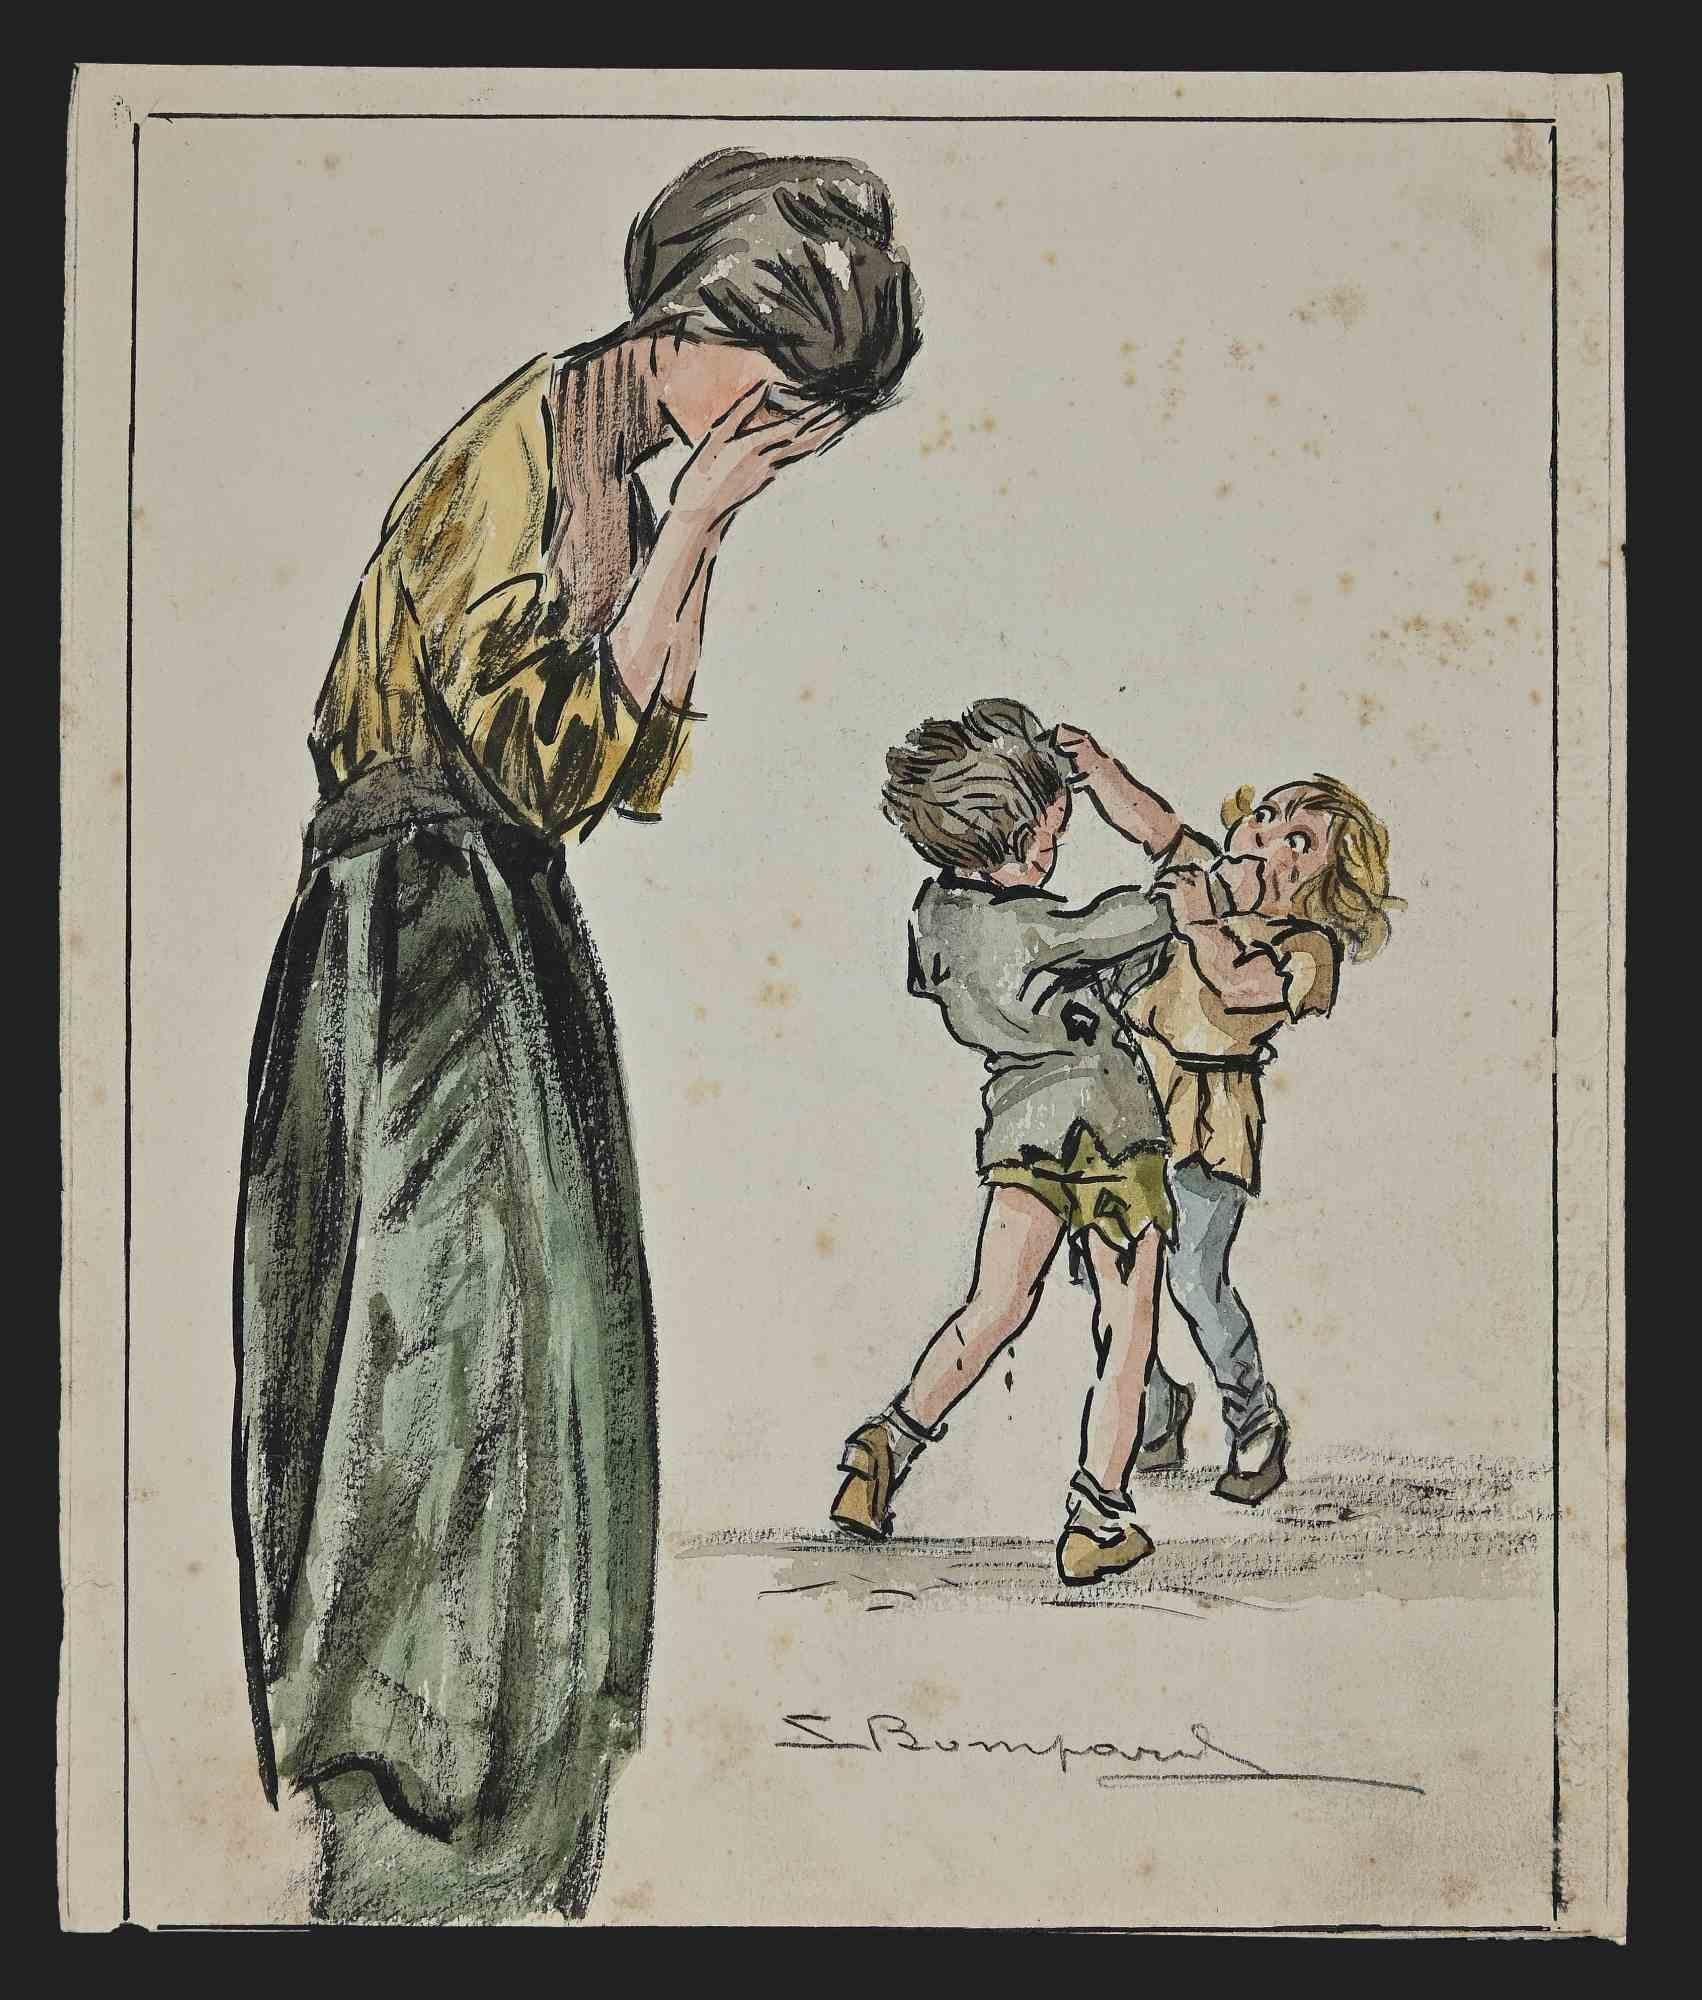 Luigi  Bompard Figurative Art - Fighting Children and Mother Cry - Drawing by Luigi Bompard - 1920s